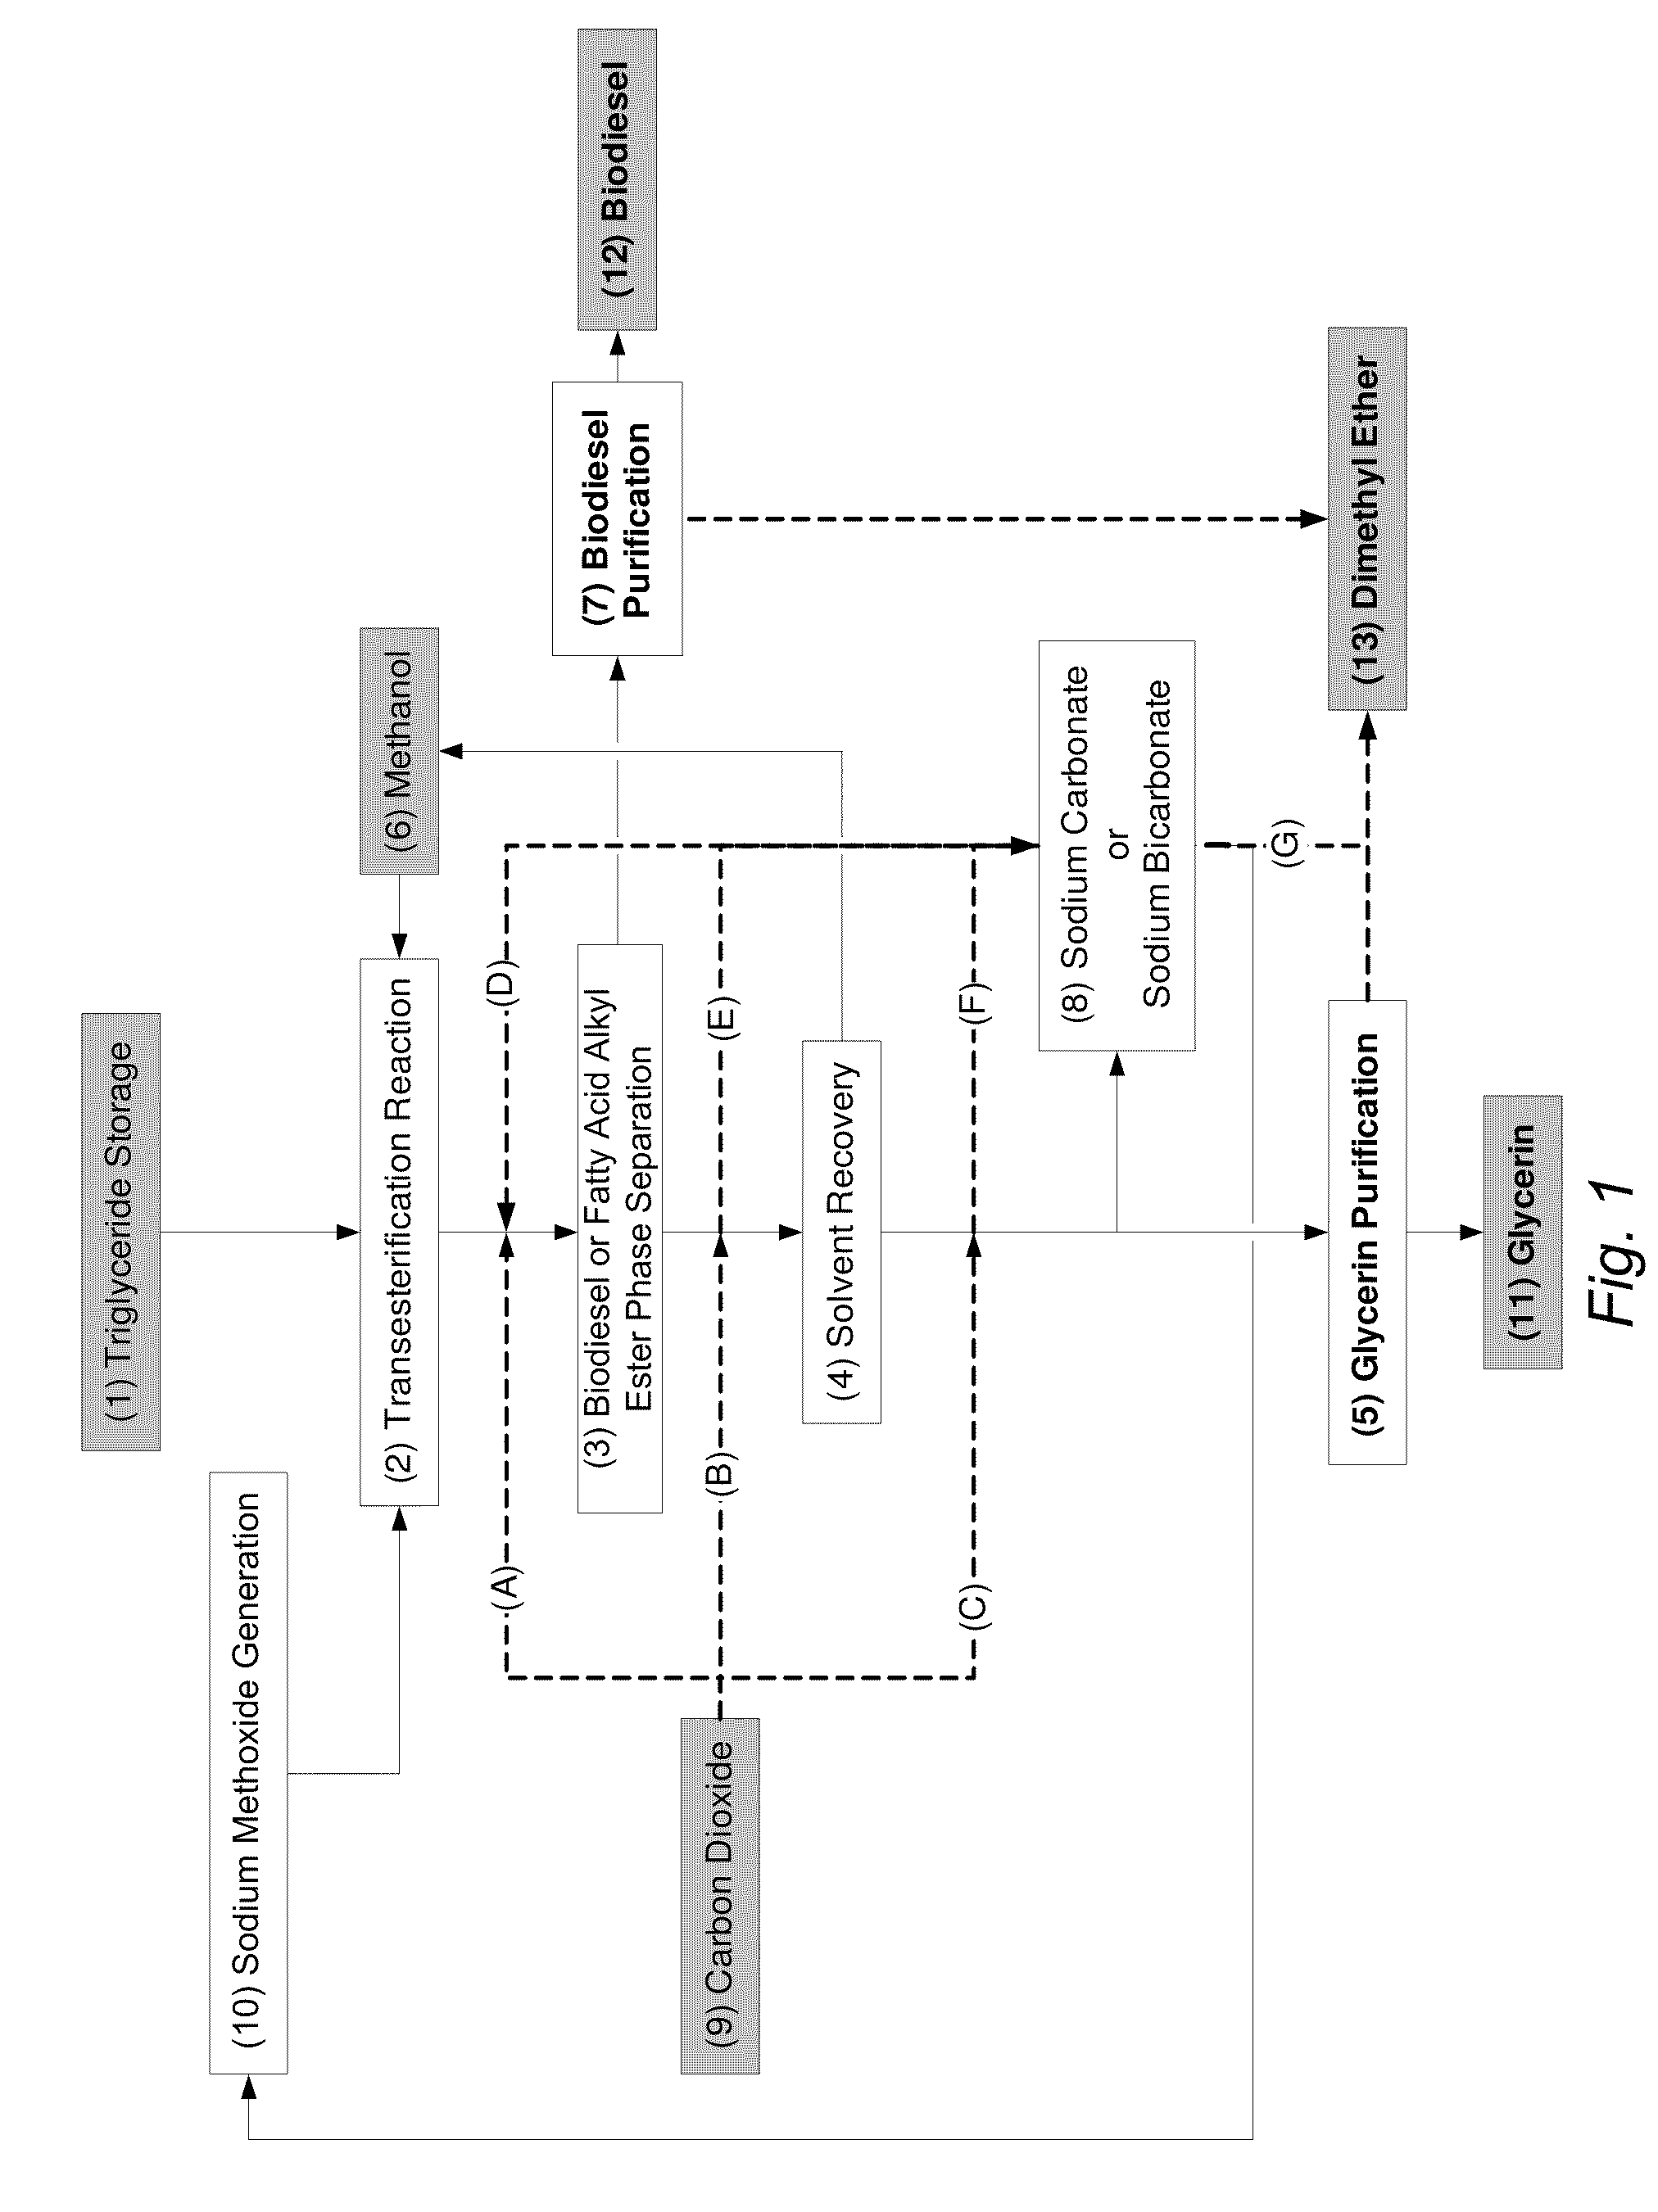 Systems and methods for removing catalyst and recovering free carboxylic acids after transesterification reaction